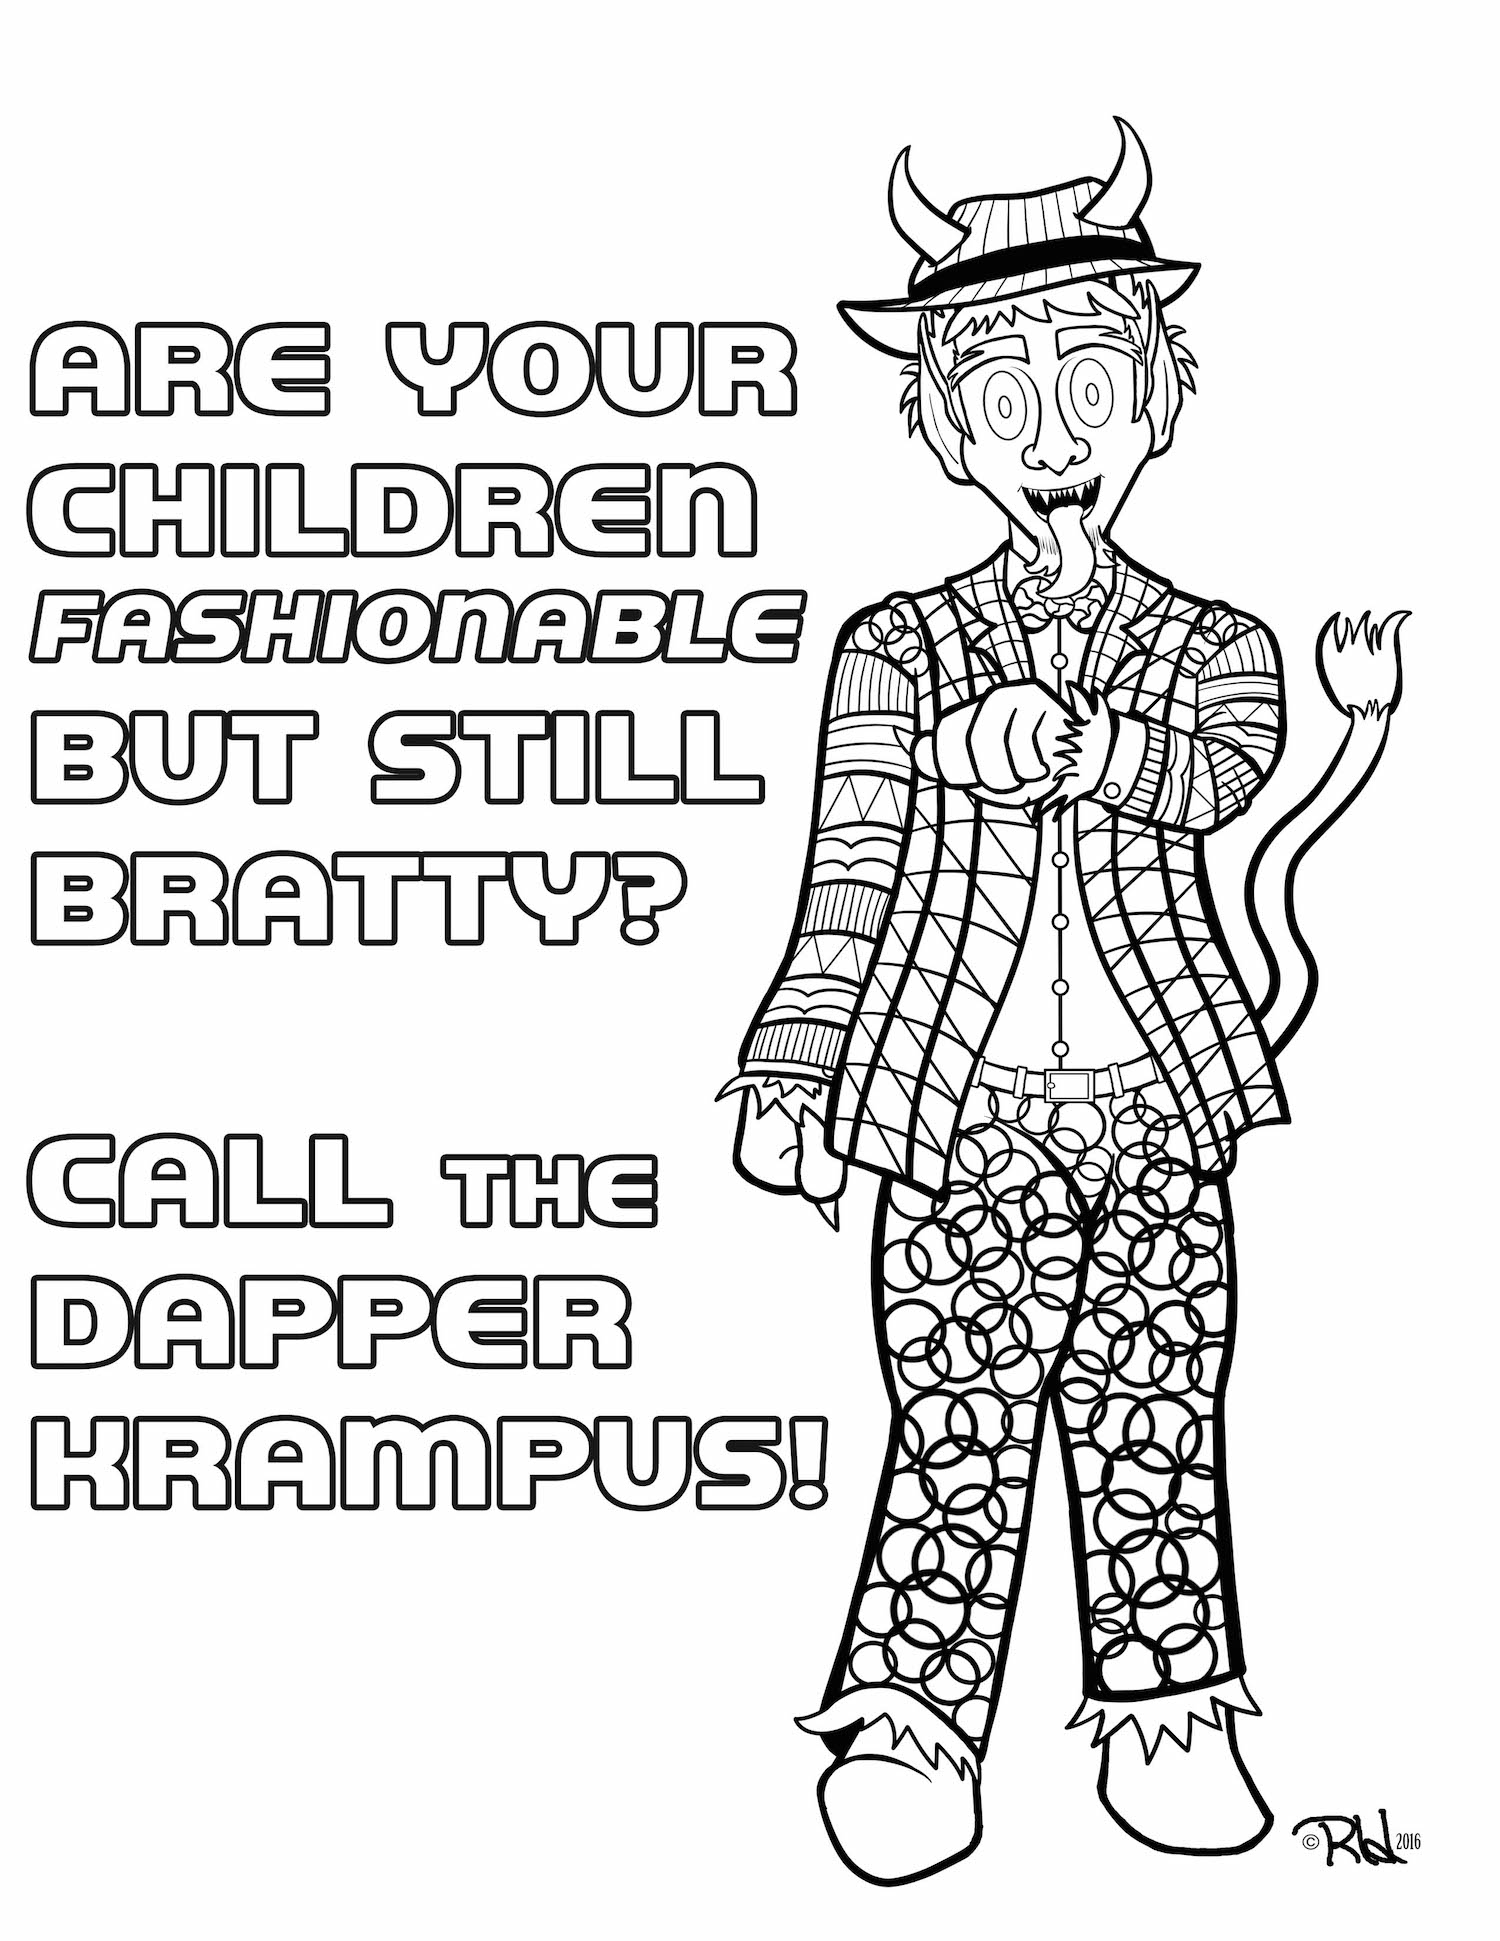 Coloring book page featuring a Krampus in a wildly-patterned suit with the text “Are your children fashionable but still bratty? Call the dapper krampus!